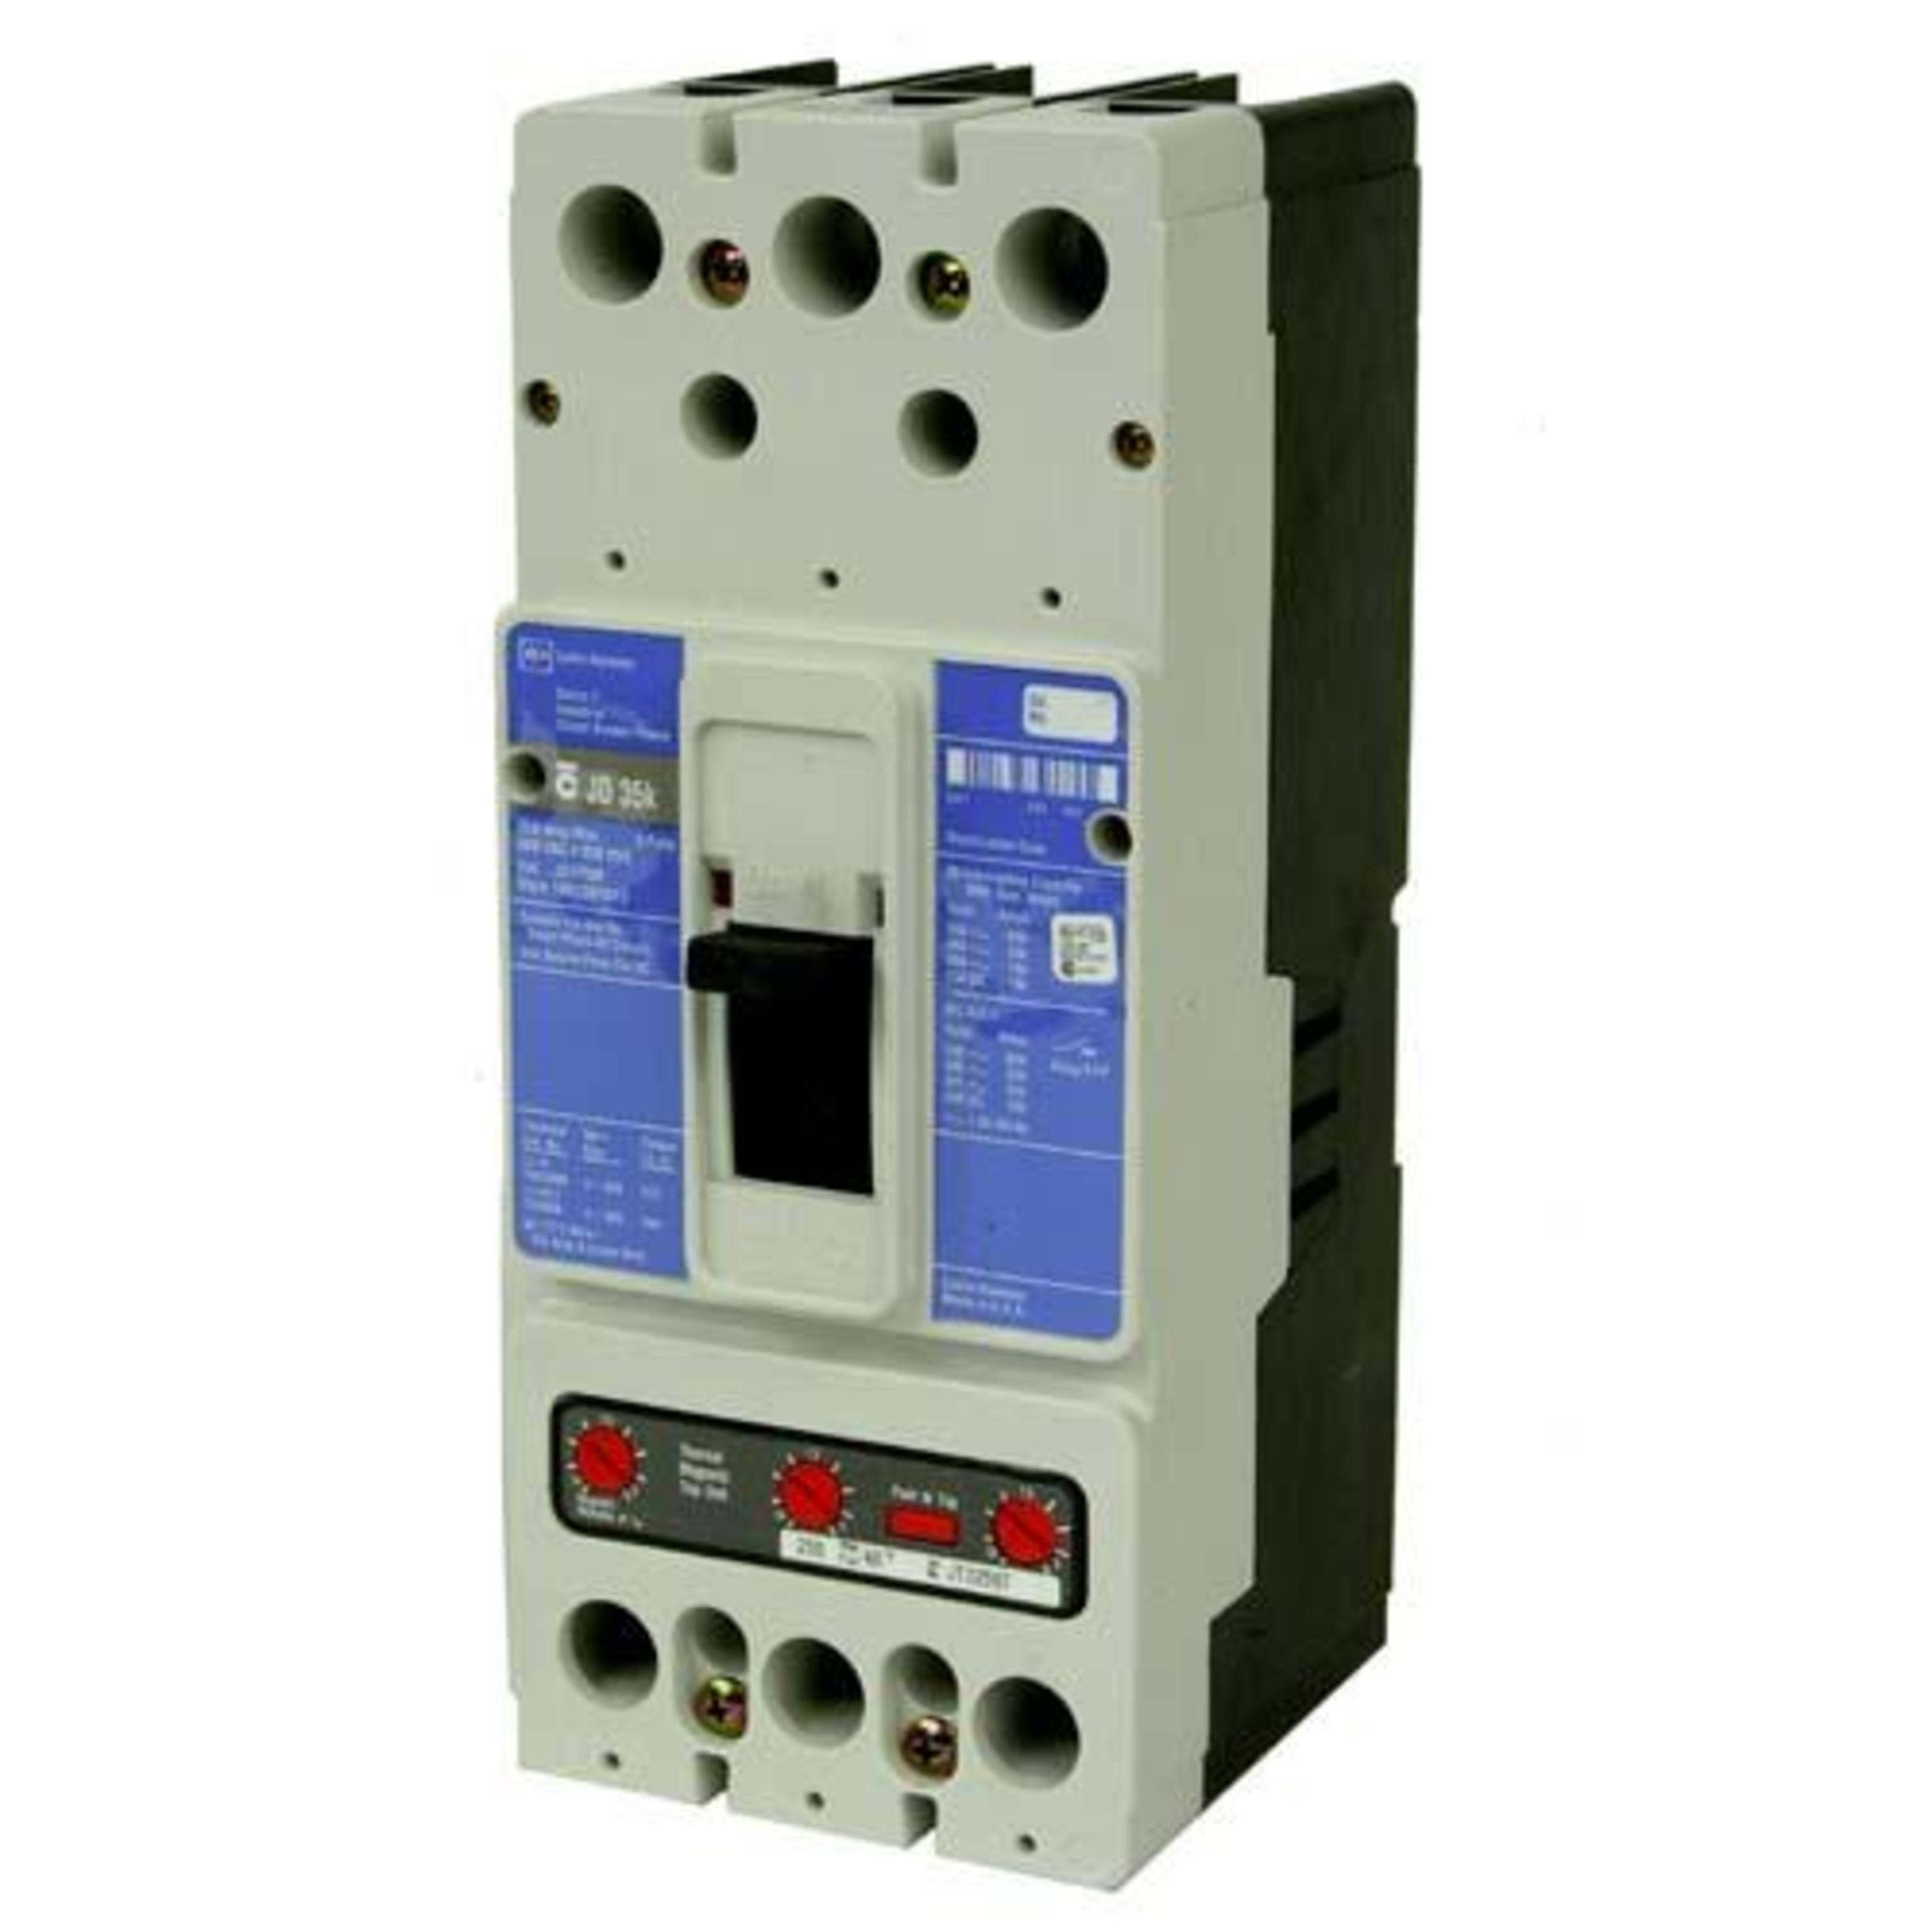 Eaton HJD3250F Eaton | Cutler Hammer HJD3250F  Circuit Breakers Molded Case Breakers – Frame Only https://gesrepair.com/wp-content/uploads/2022/Eaton/Images/Eaton_HJD3250F_Circuit_Breakers.jpg